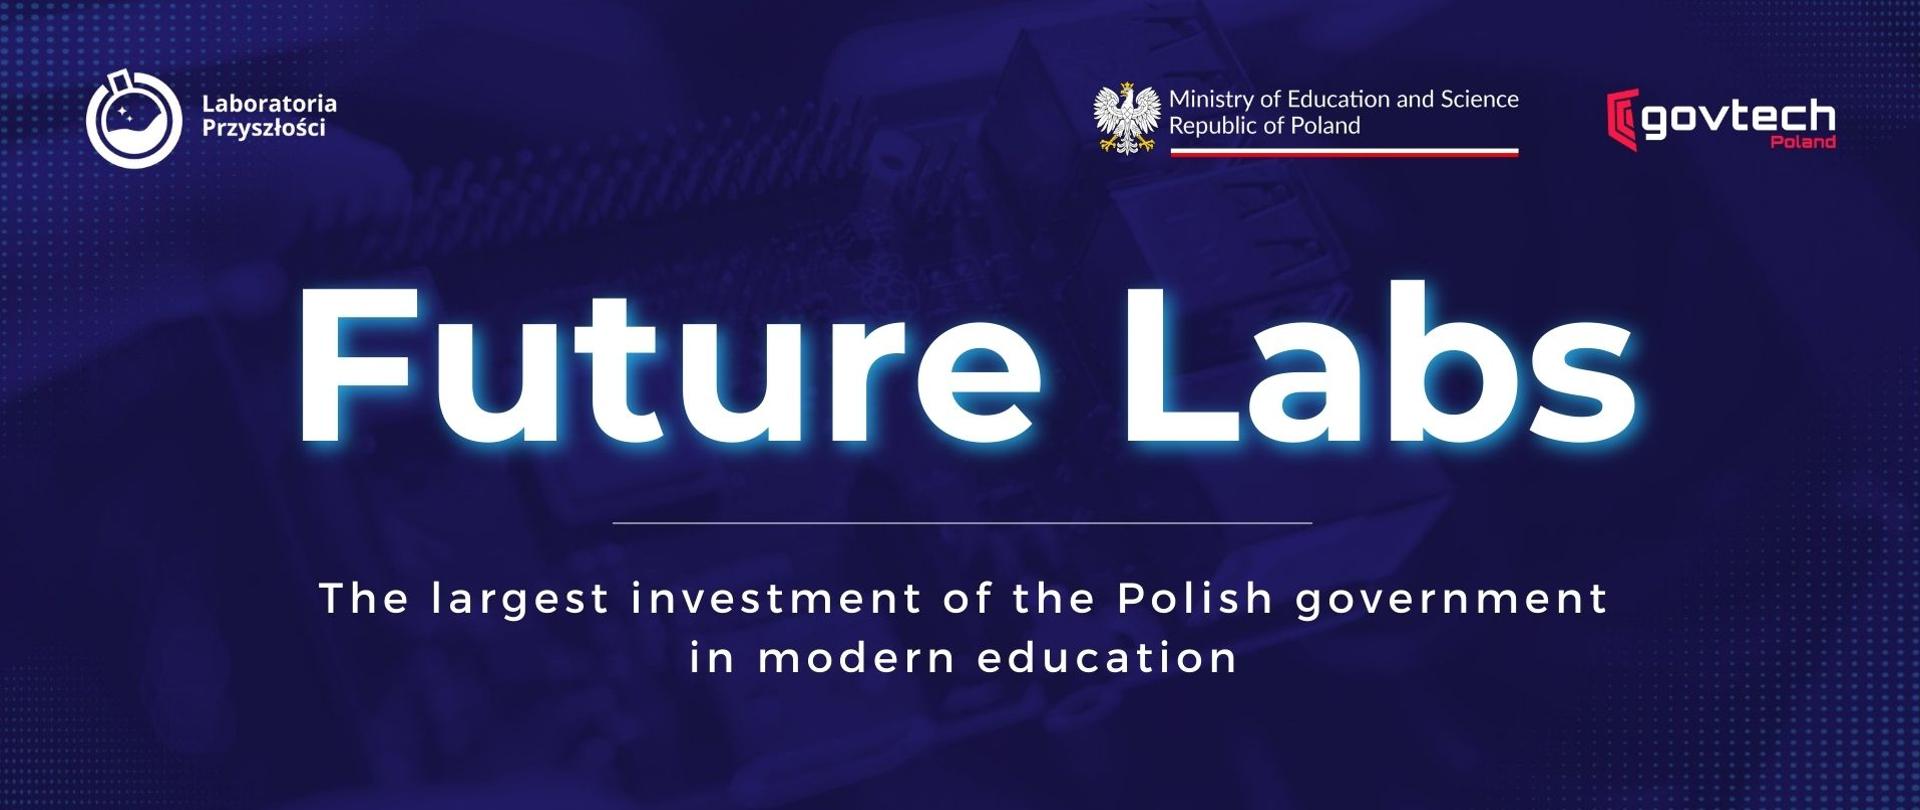 Future Labs
The largest investment of the Polish government in modern education